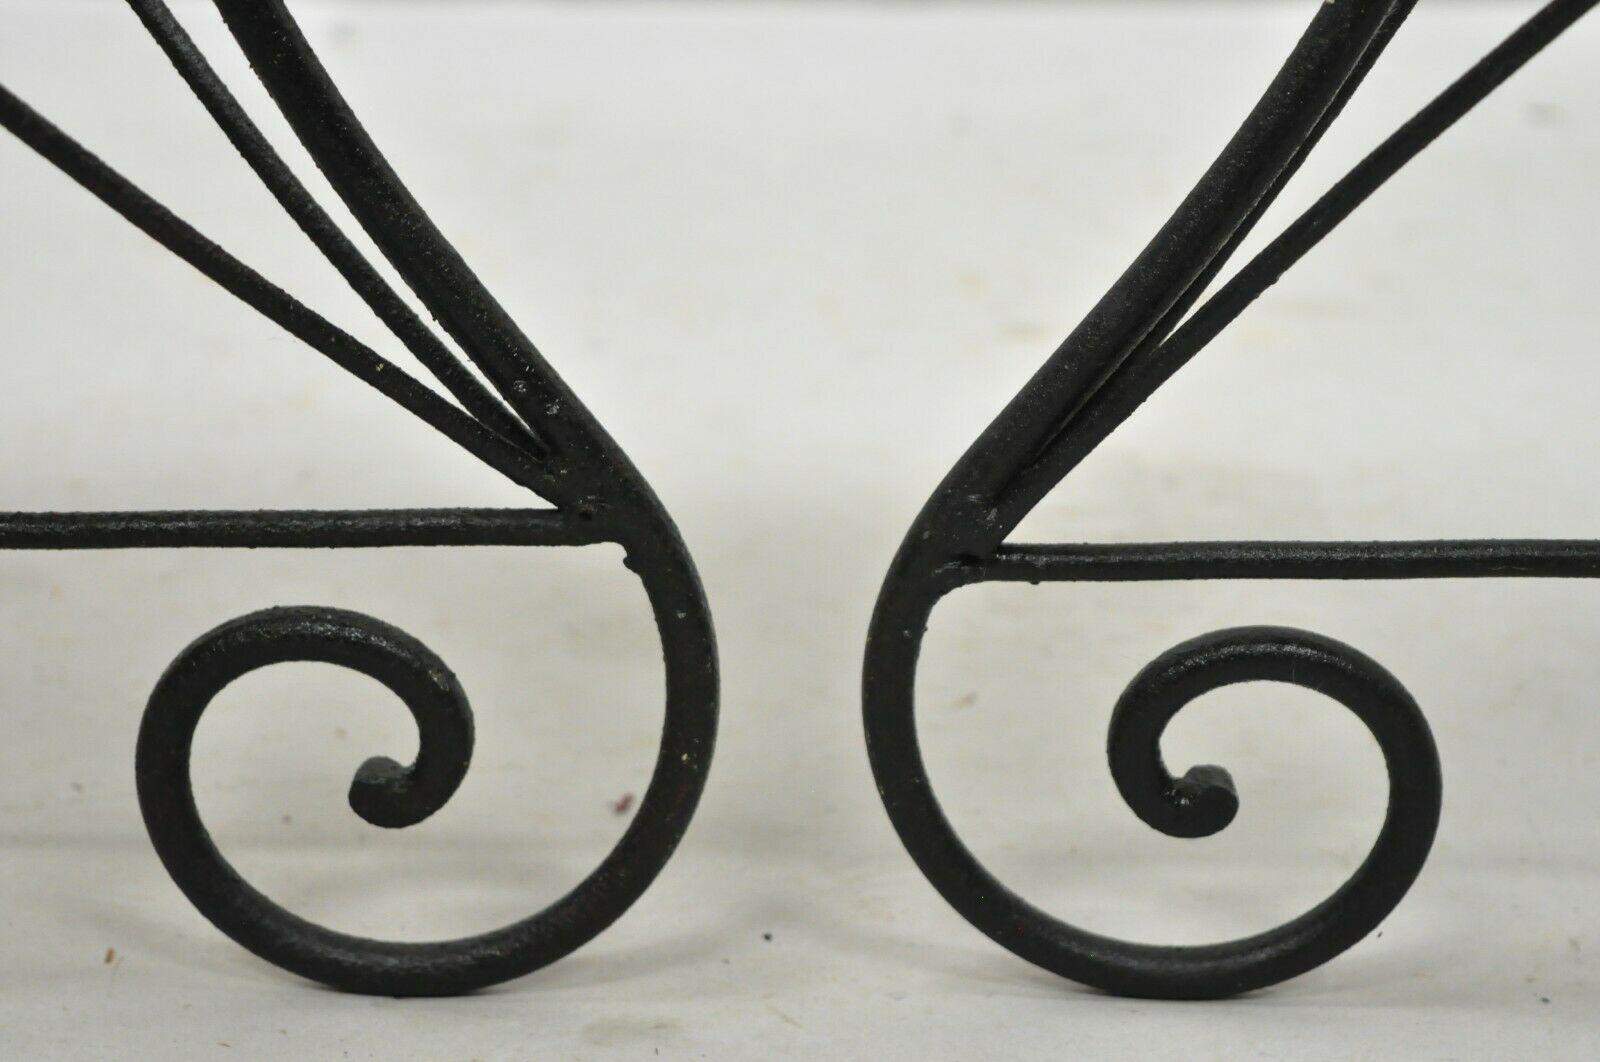 Pair of Art Nouveau Style Stool Bench Seats with Scrolling Wrought Iron Frame 1